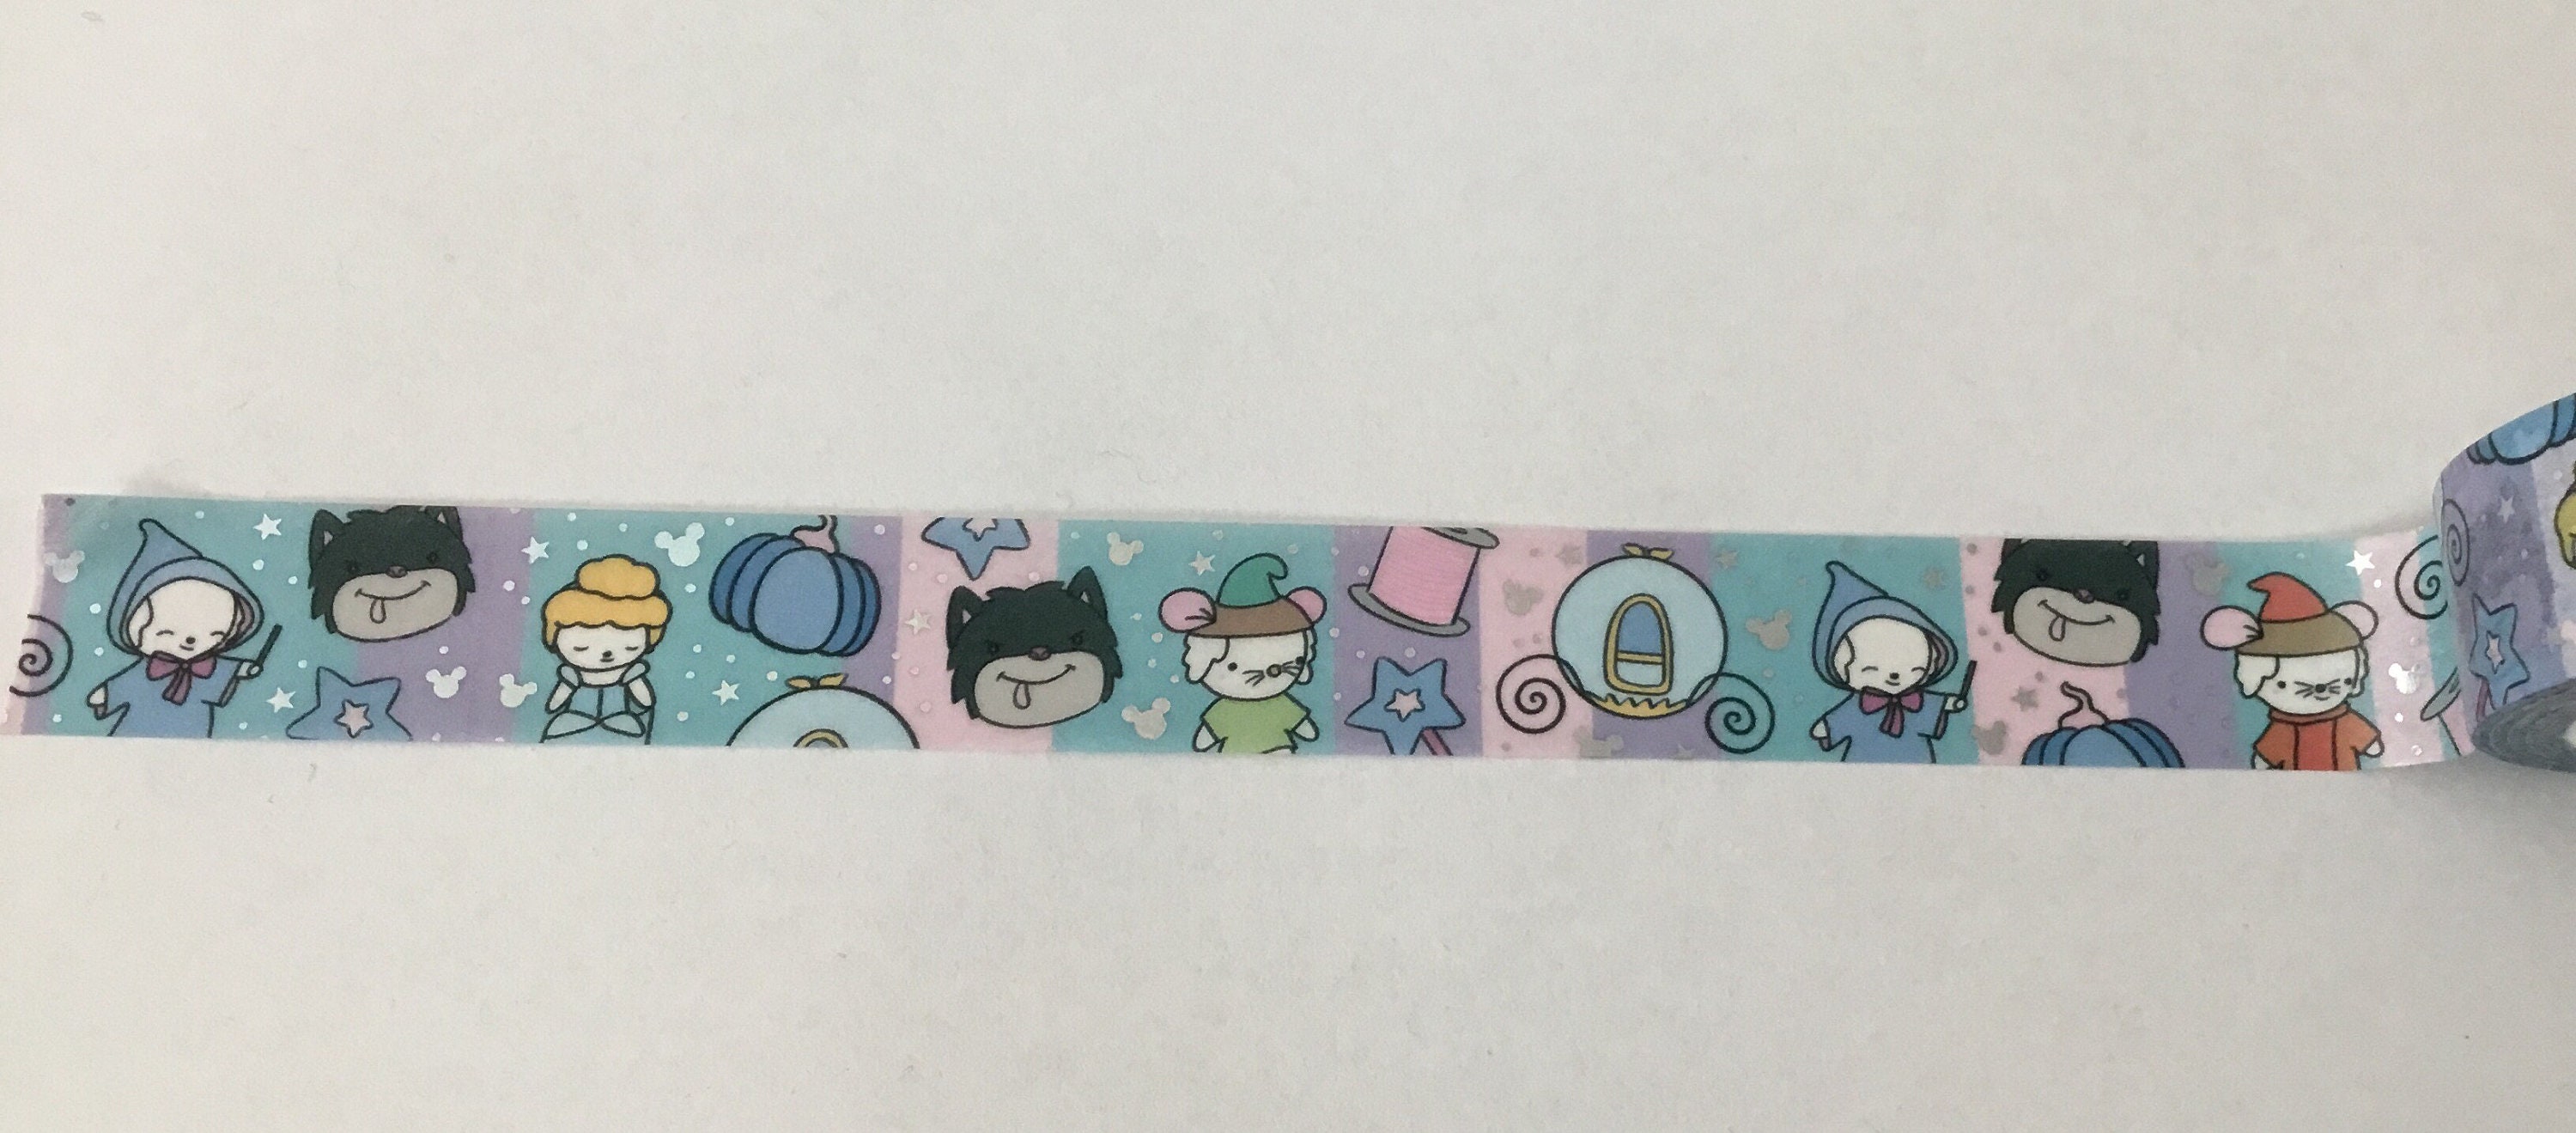 Simply Gilded Washi Tape Sample Conversation Hearts Valentine Washi Tape  Gold Foil Silver Foil Craft & Planner Tape 24 Length 